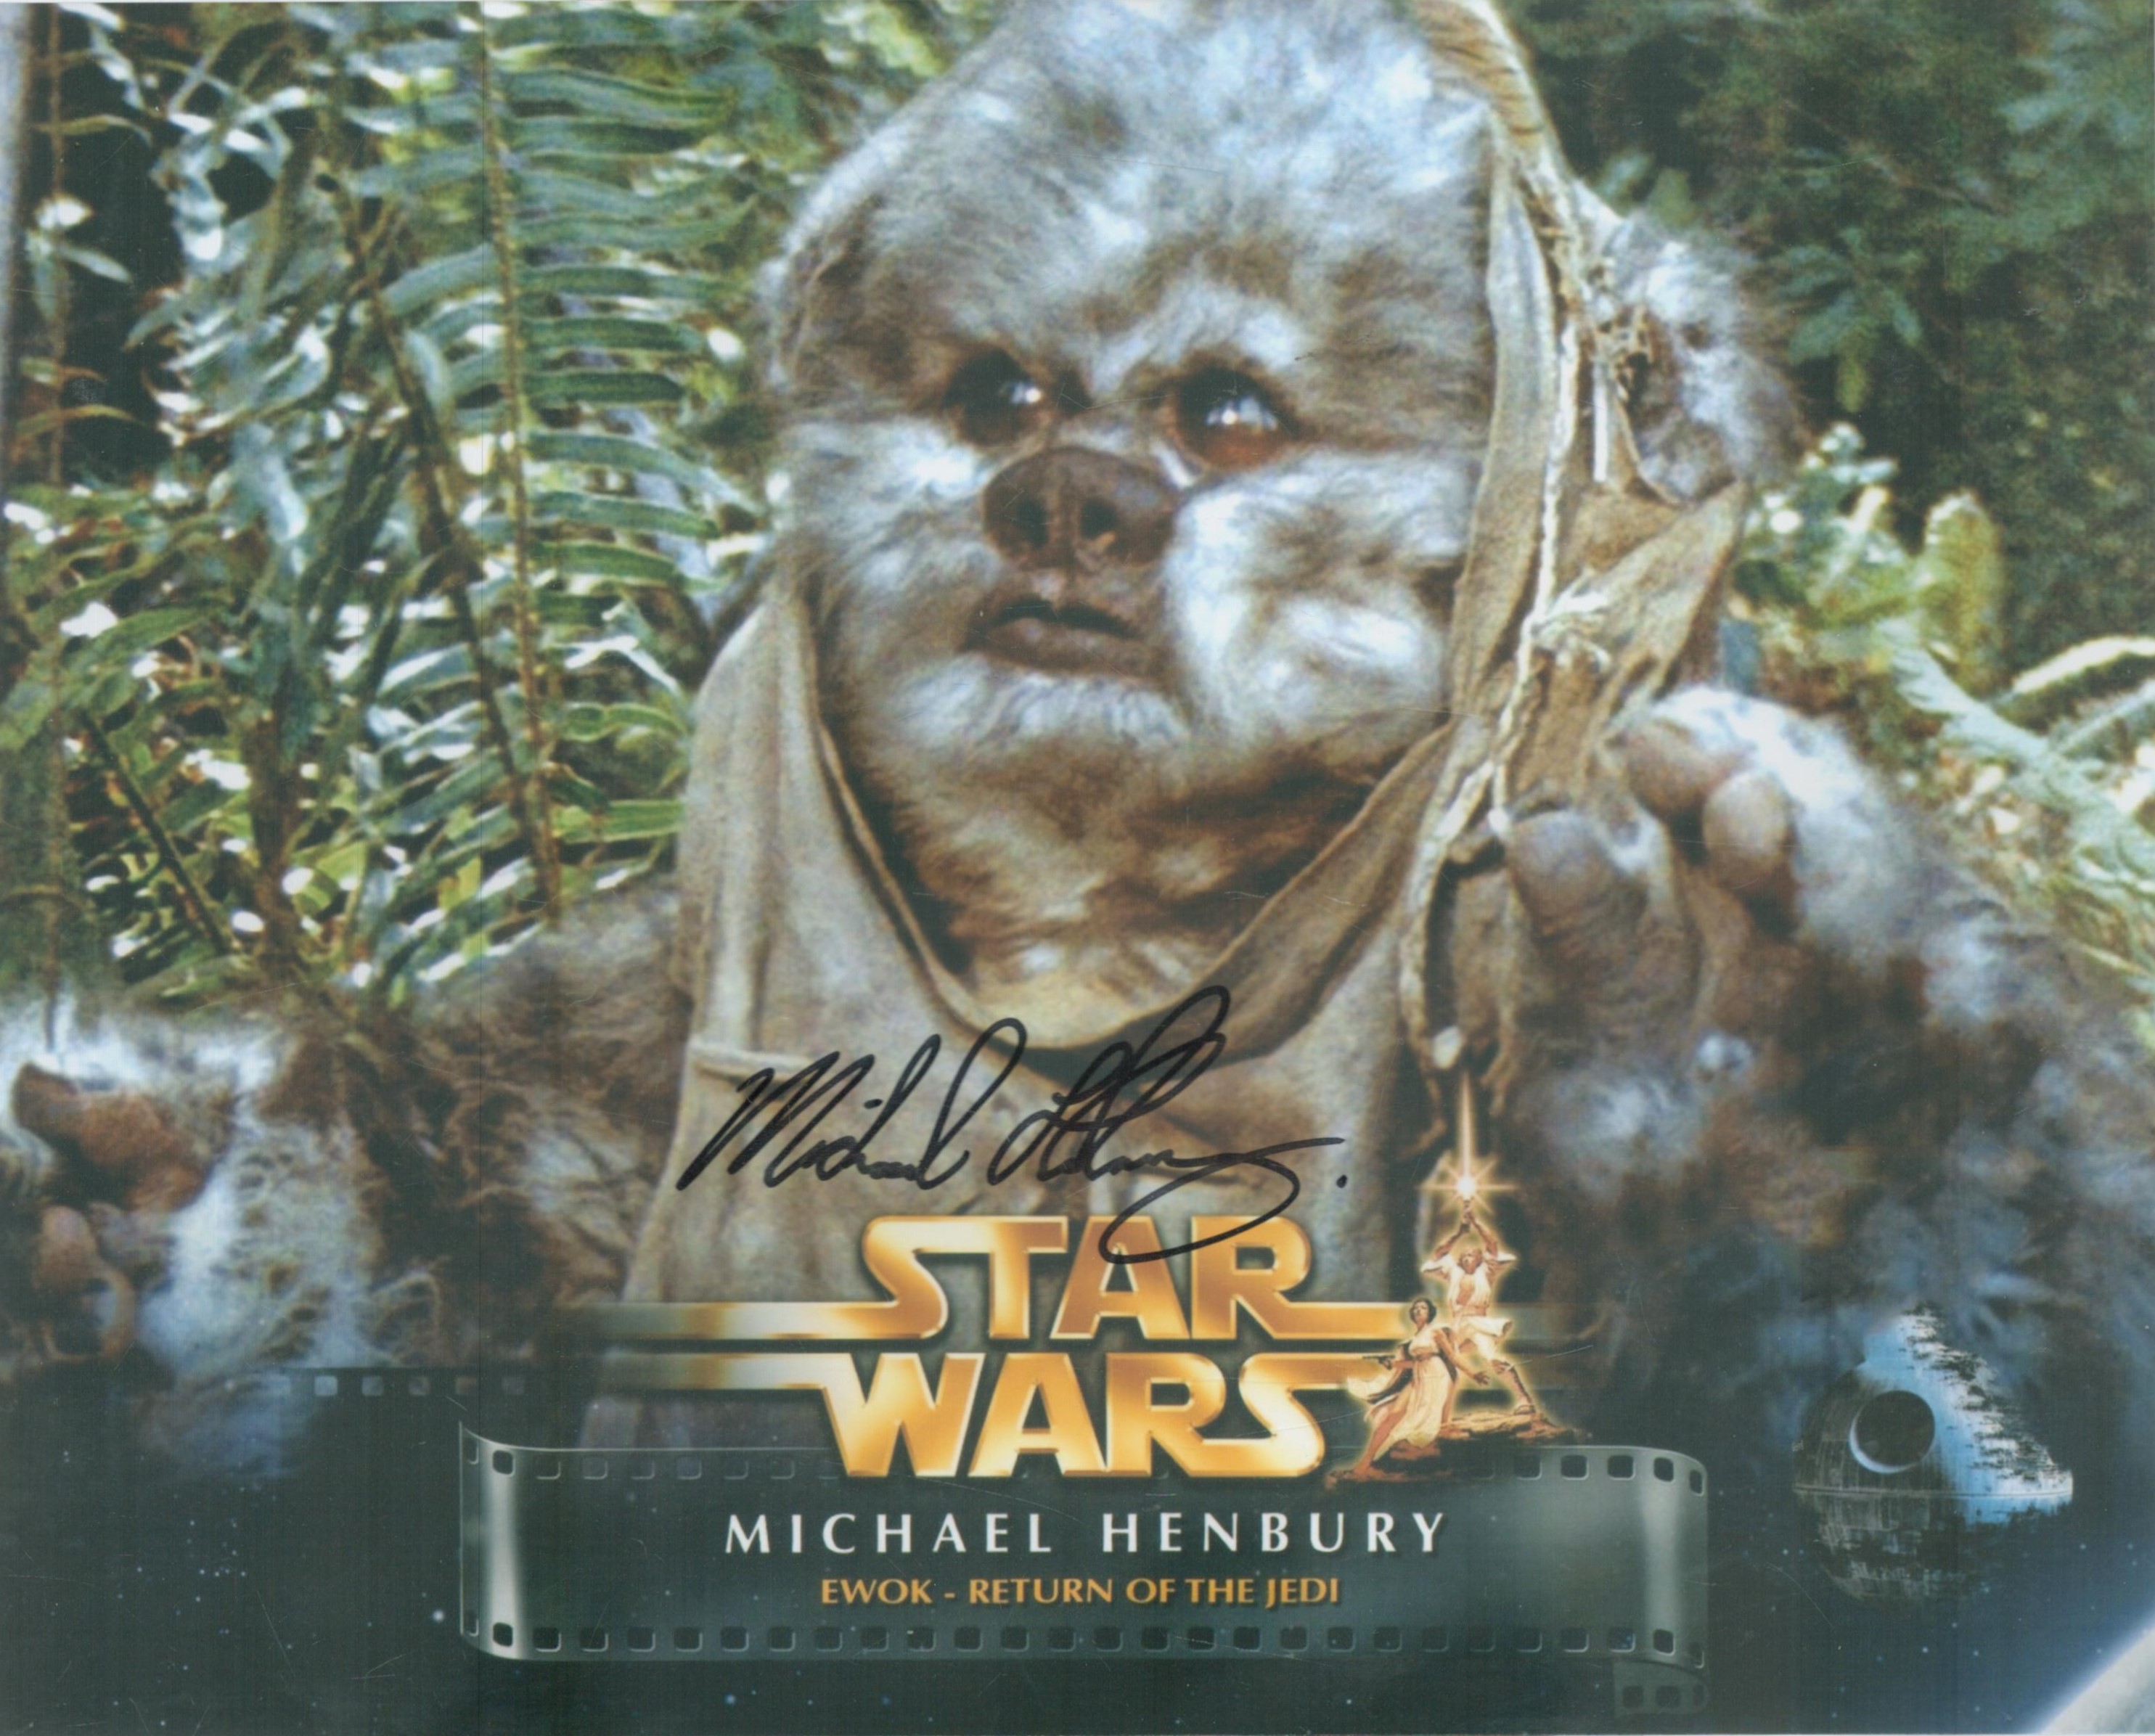 Star Wars Ewok Michael Henbury collection three The Return of the Jedi 8 x 10 inch colour photos. - Image 2 of 2